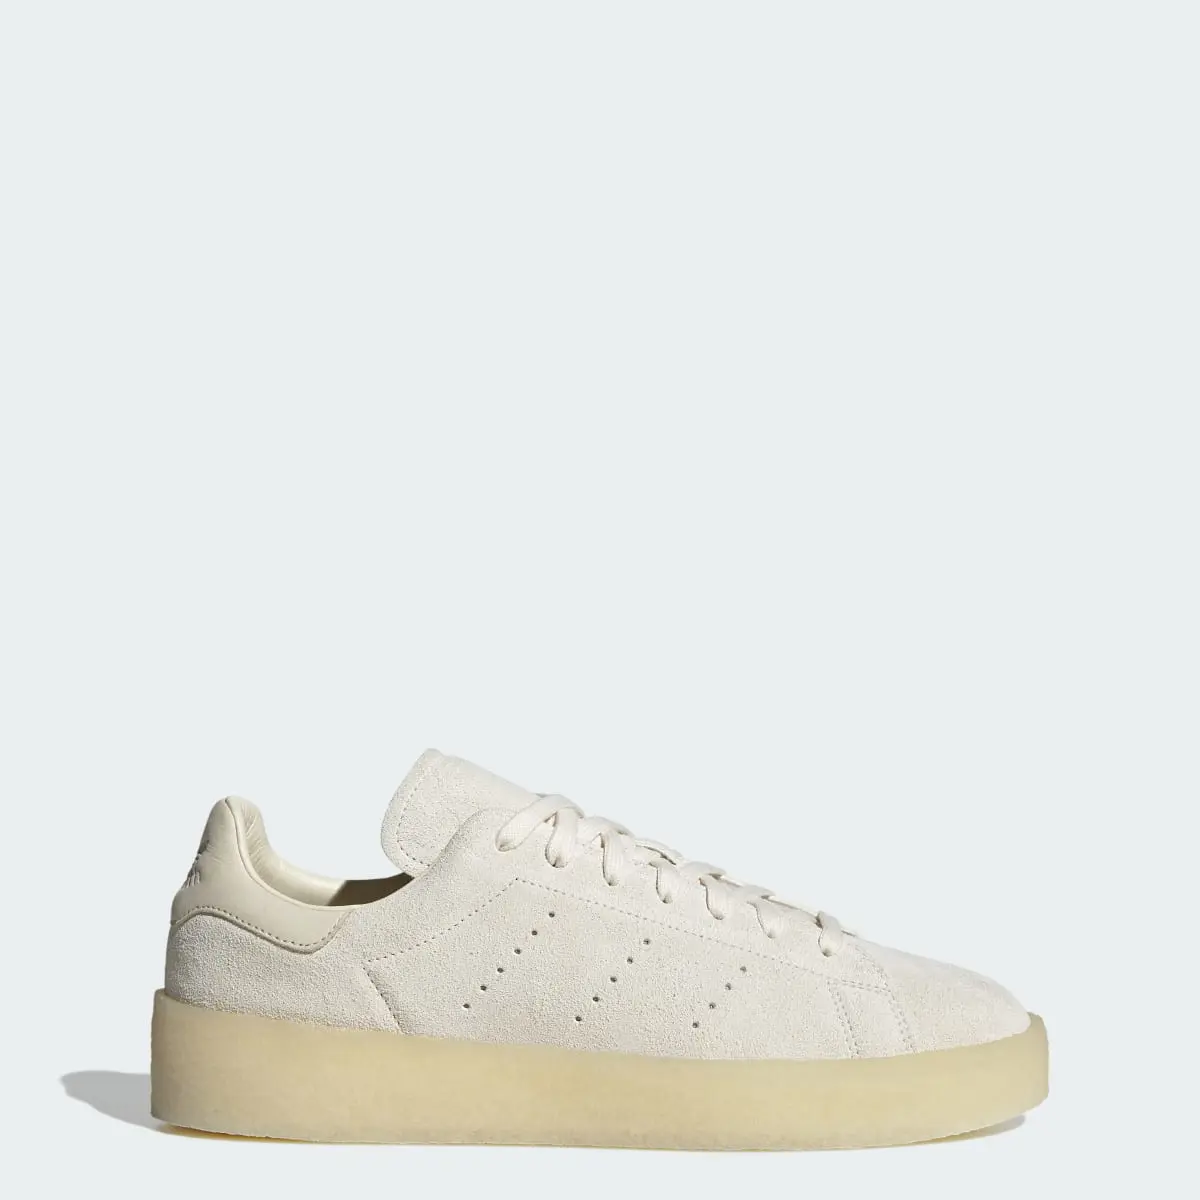 Adidas Stan Smith Crepe Shoes. 1